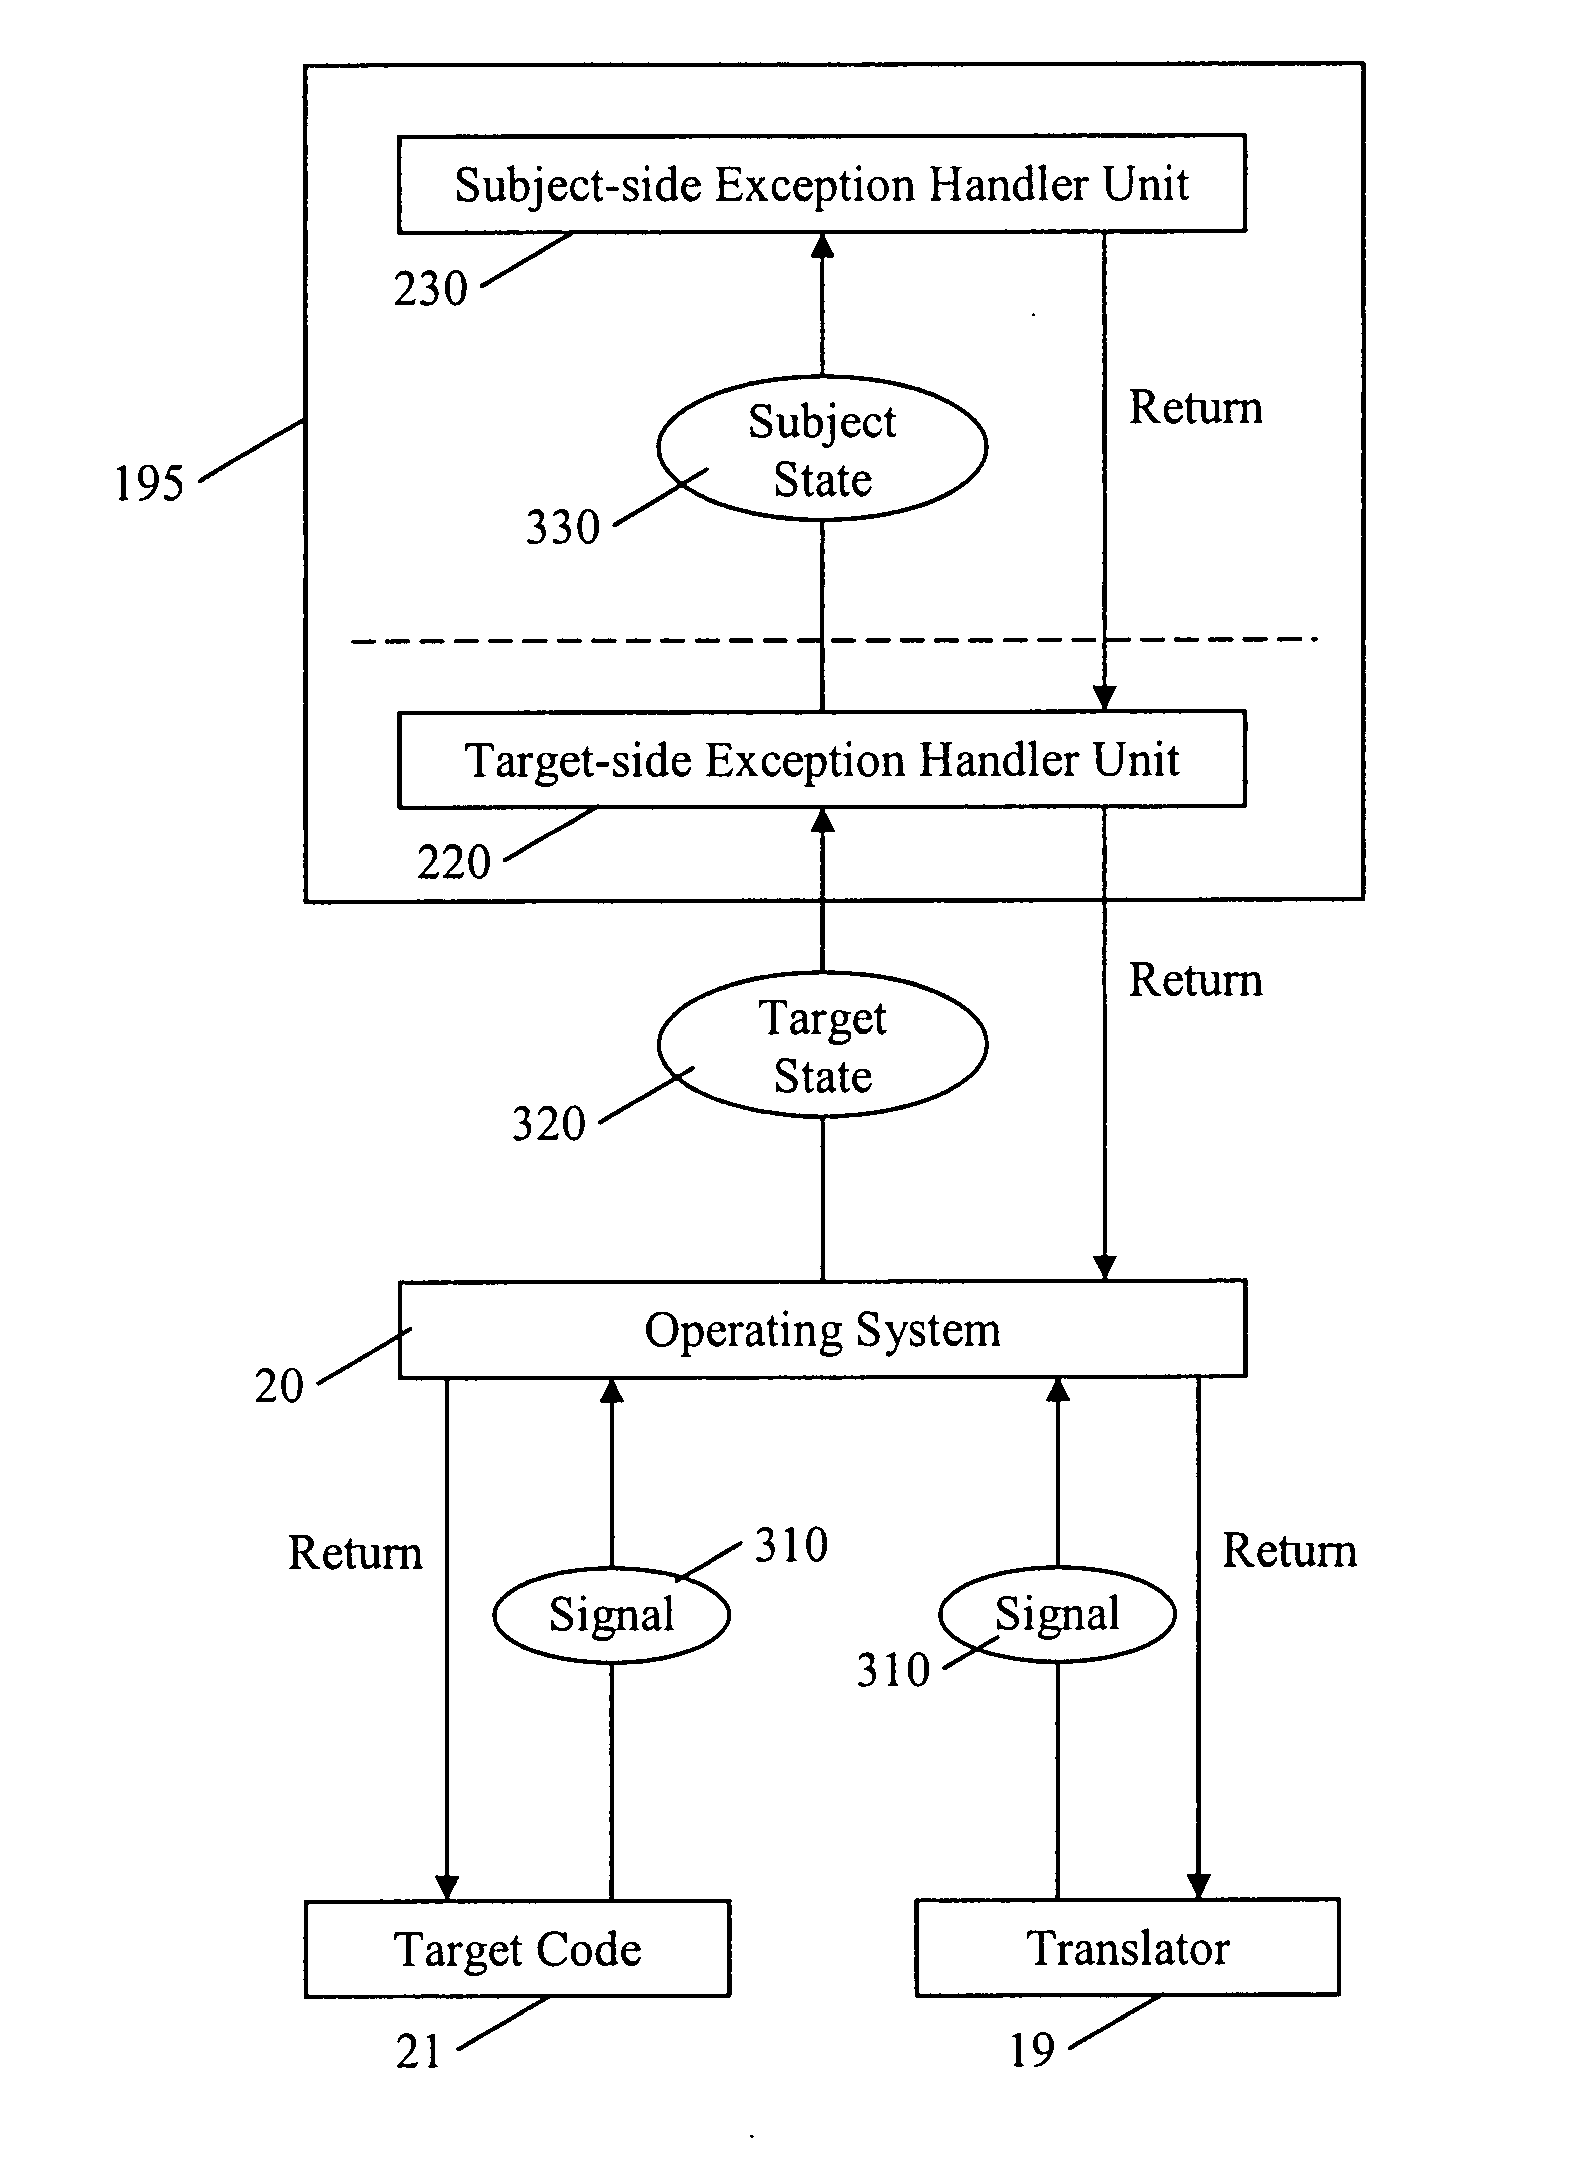 Apparatus and method for handling exception signals in a computing system